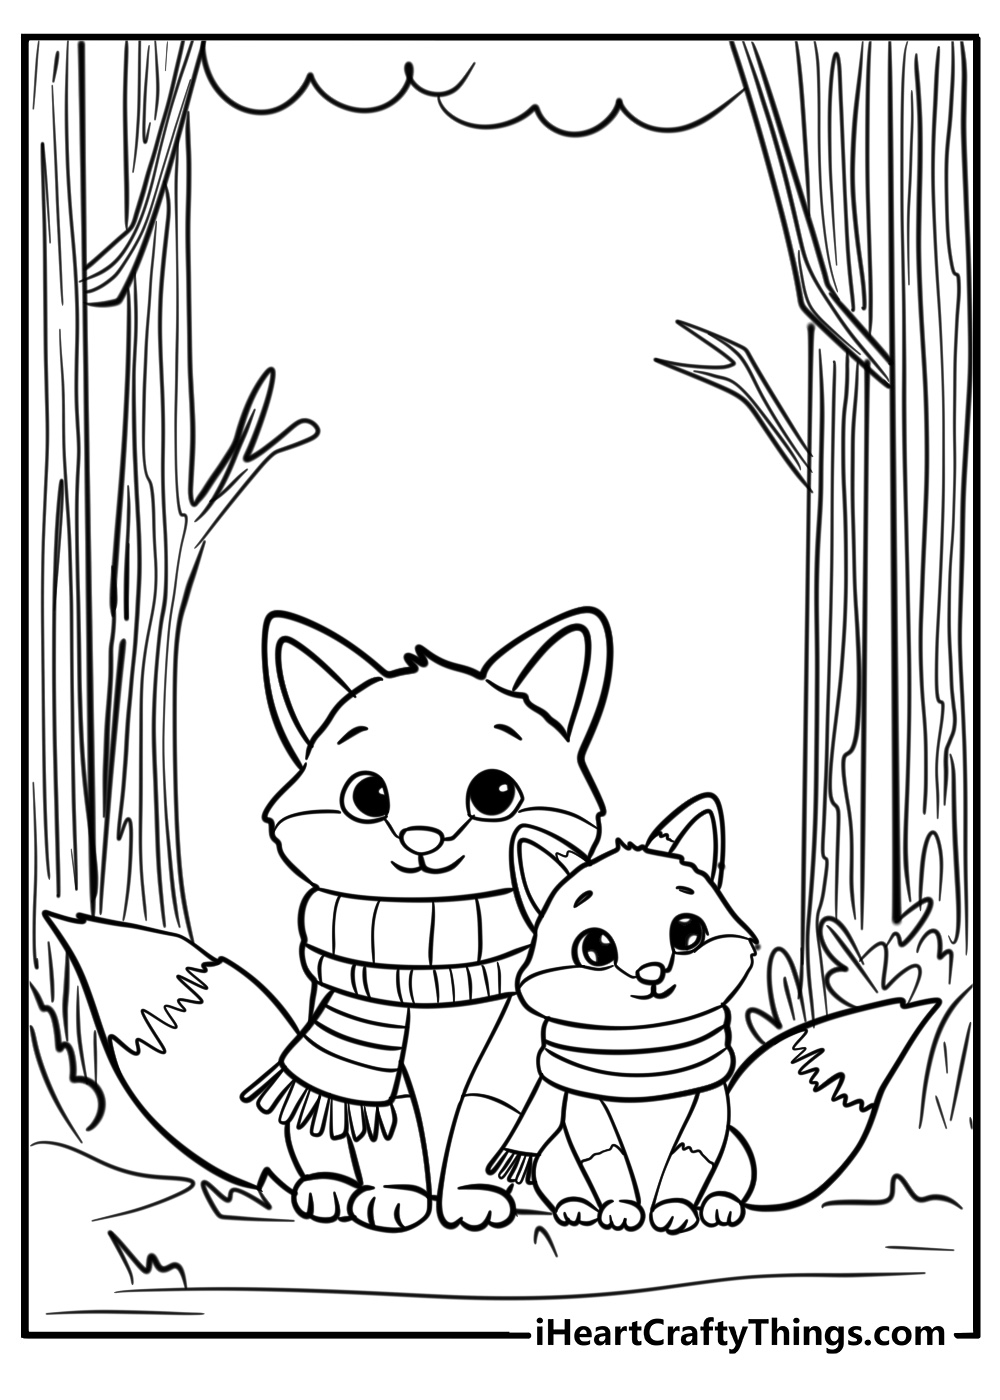 Cute animals coloring page of two foxes wearing scarves in fall